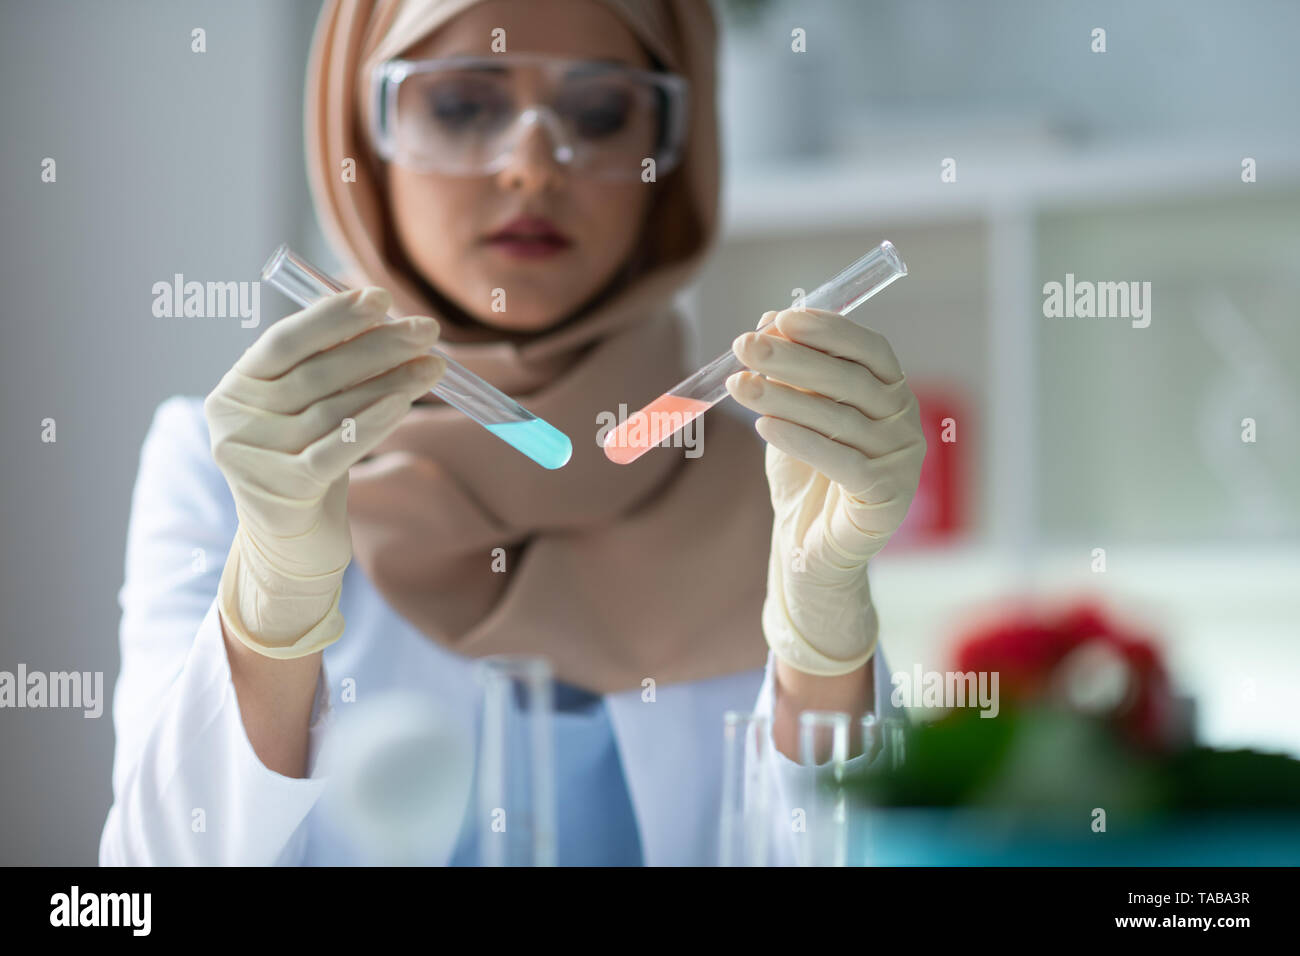 Pink And Blue Close Up Of Female Chemist Holding Test Tubes With Pink And Blue Chemical Agents 0936